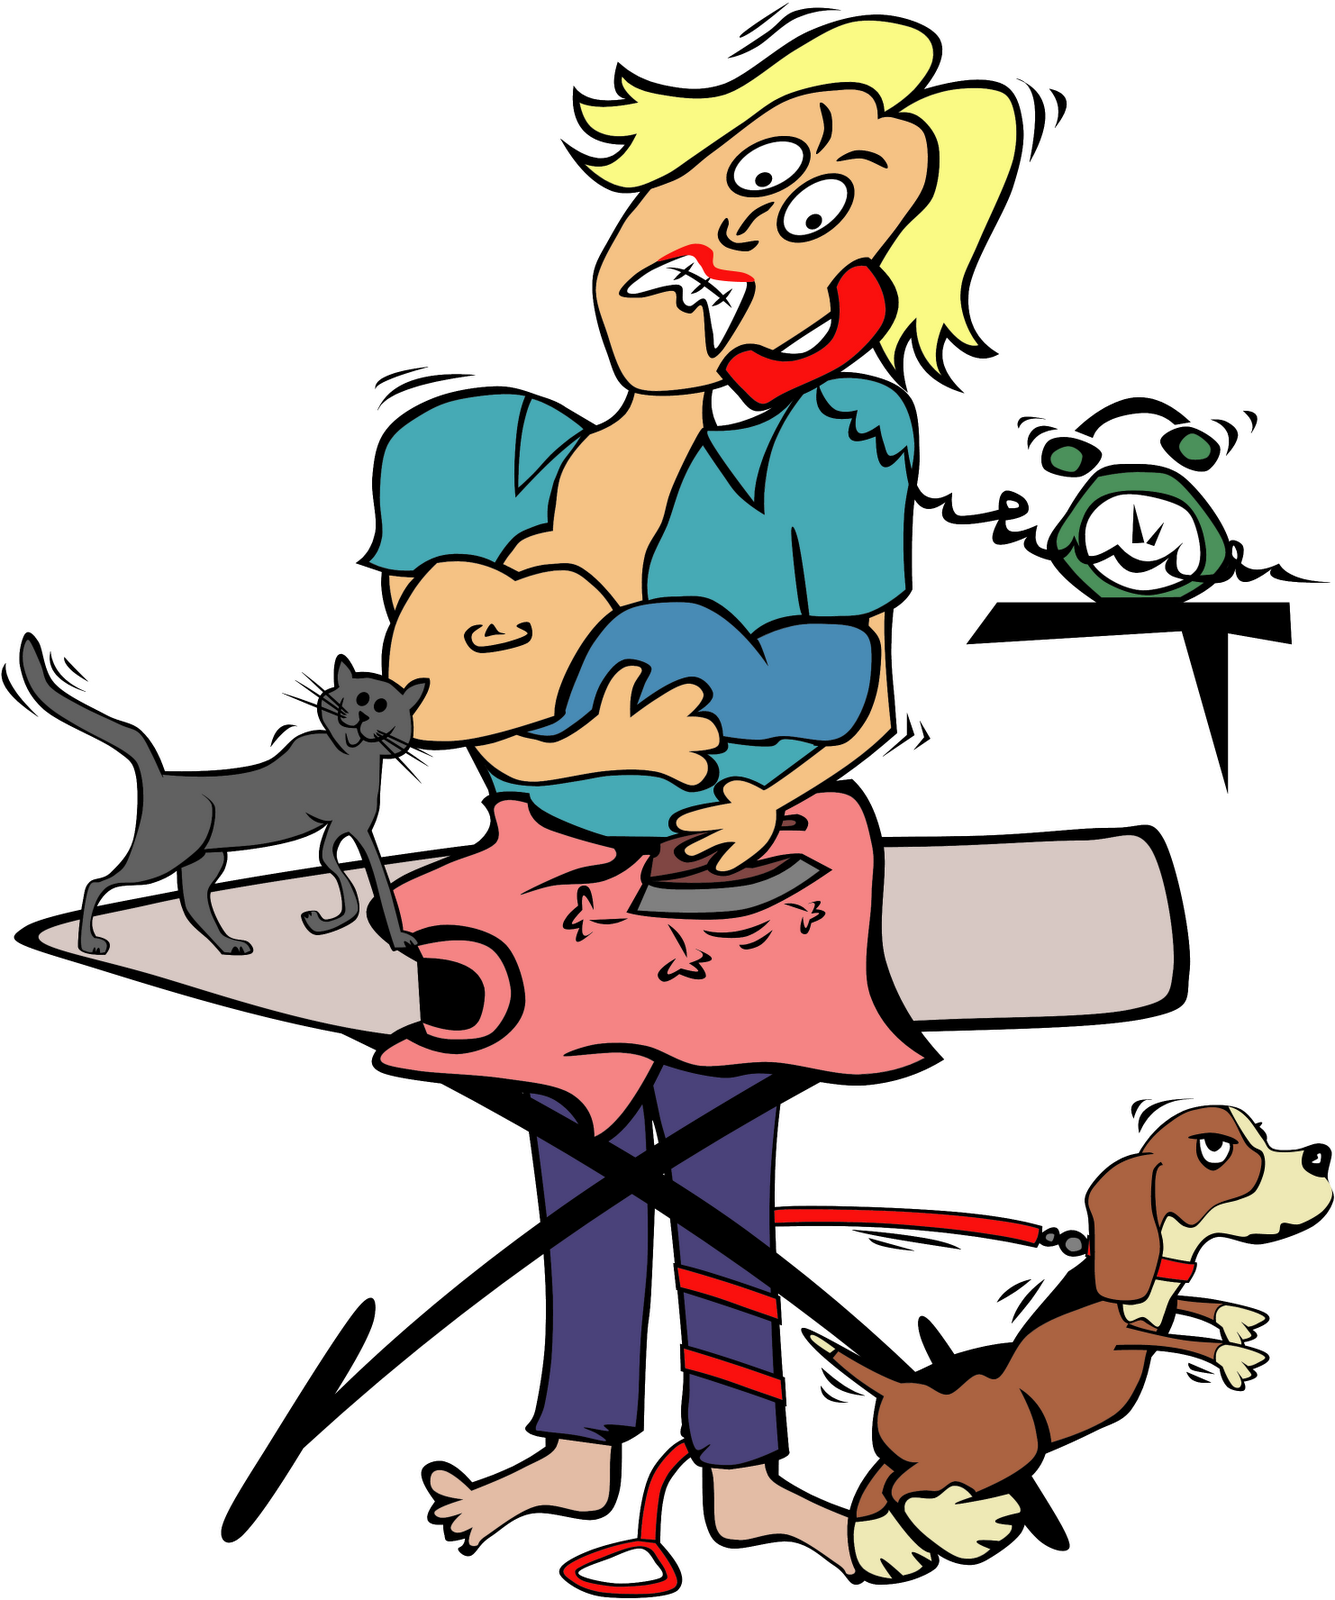 Free Clip Art Of Going Crazy - ClipArt Best